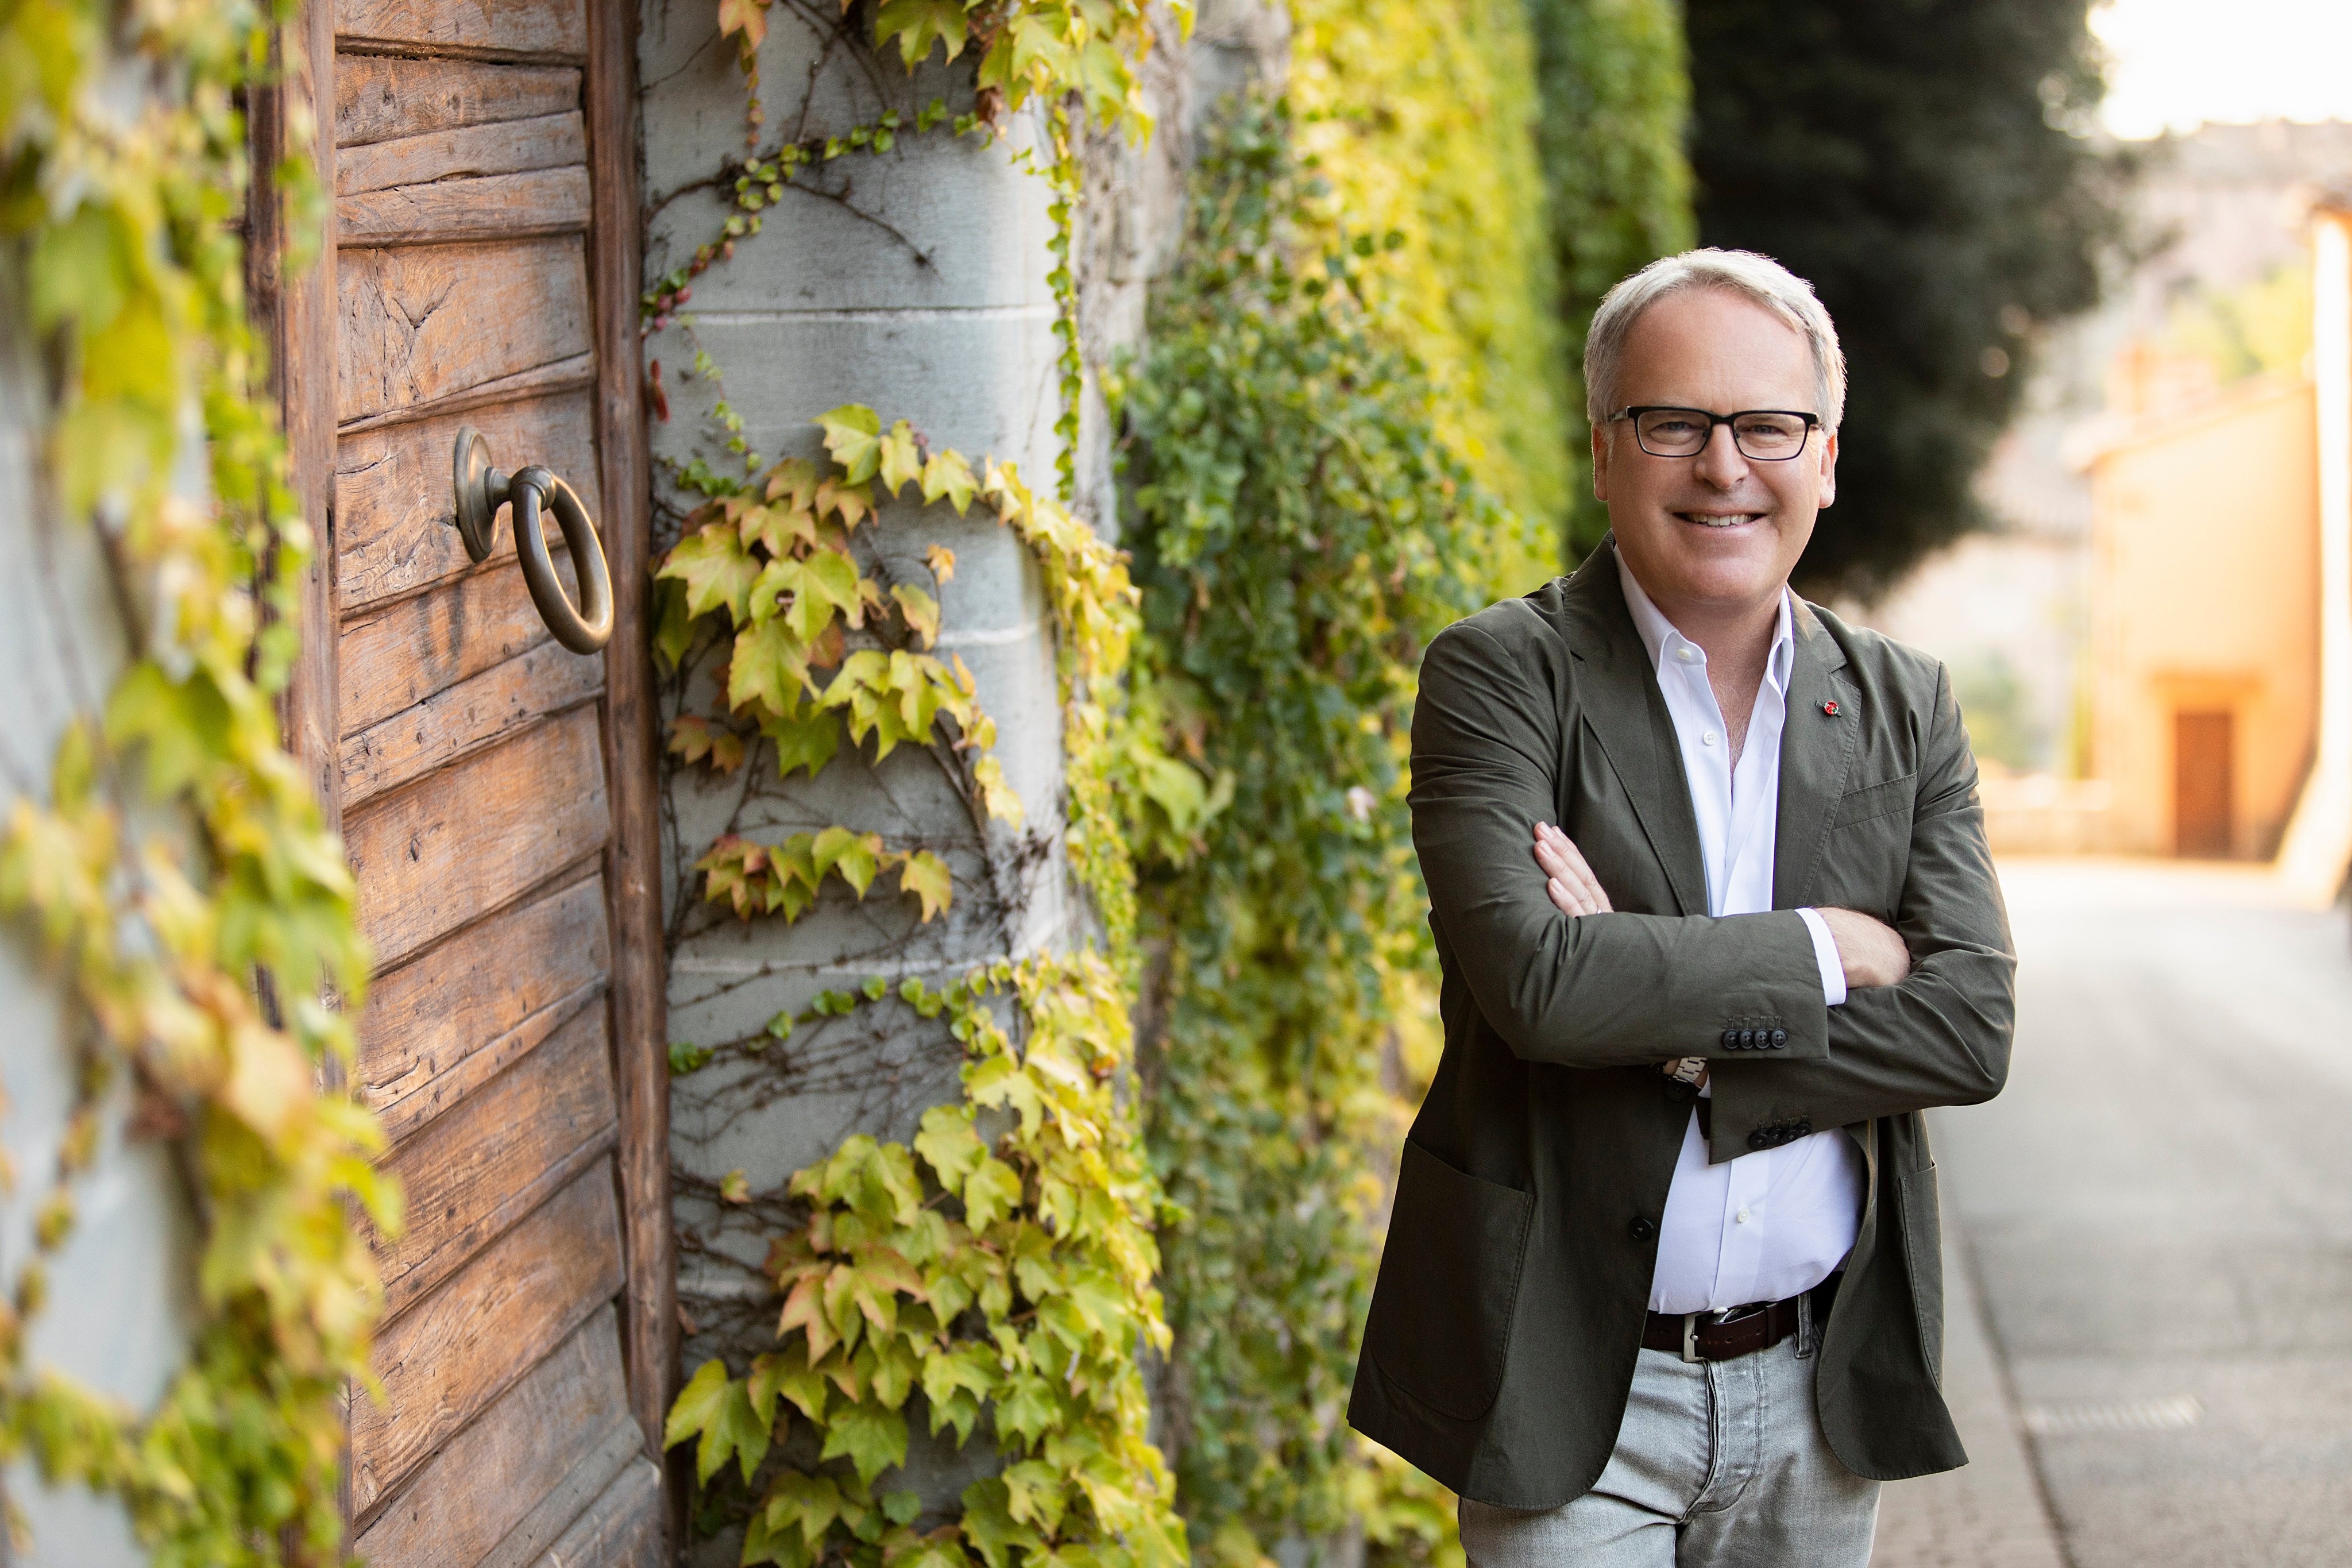 Famed wine critic James Suckling, whose tasting odyssey began over a bottle with his dad. Photo: Handout